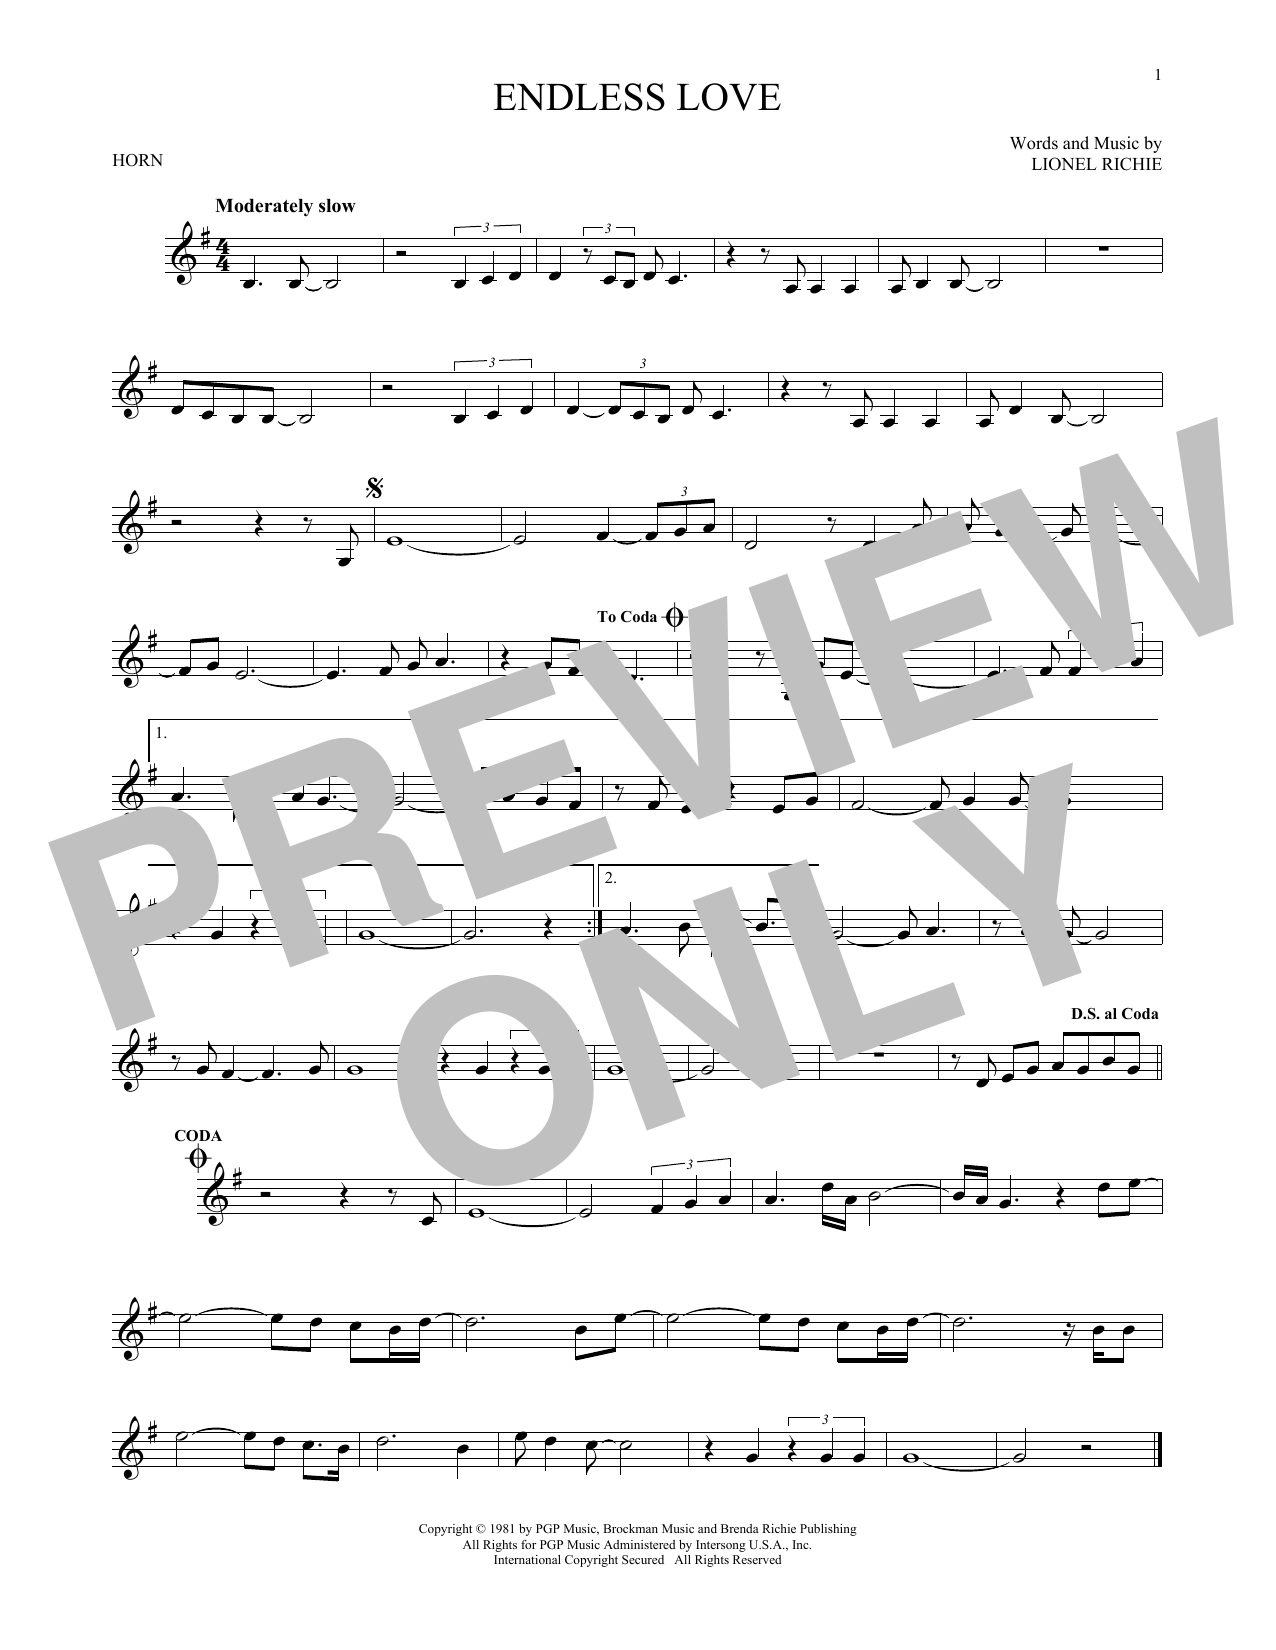 Download Lionel Richie & Diana Ross Endless Love Sheet Music